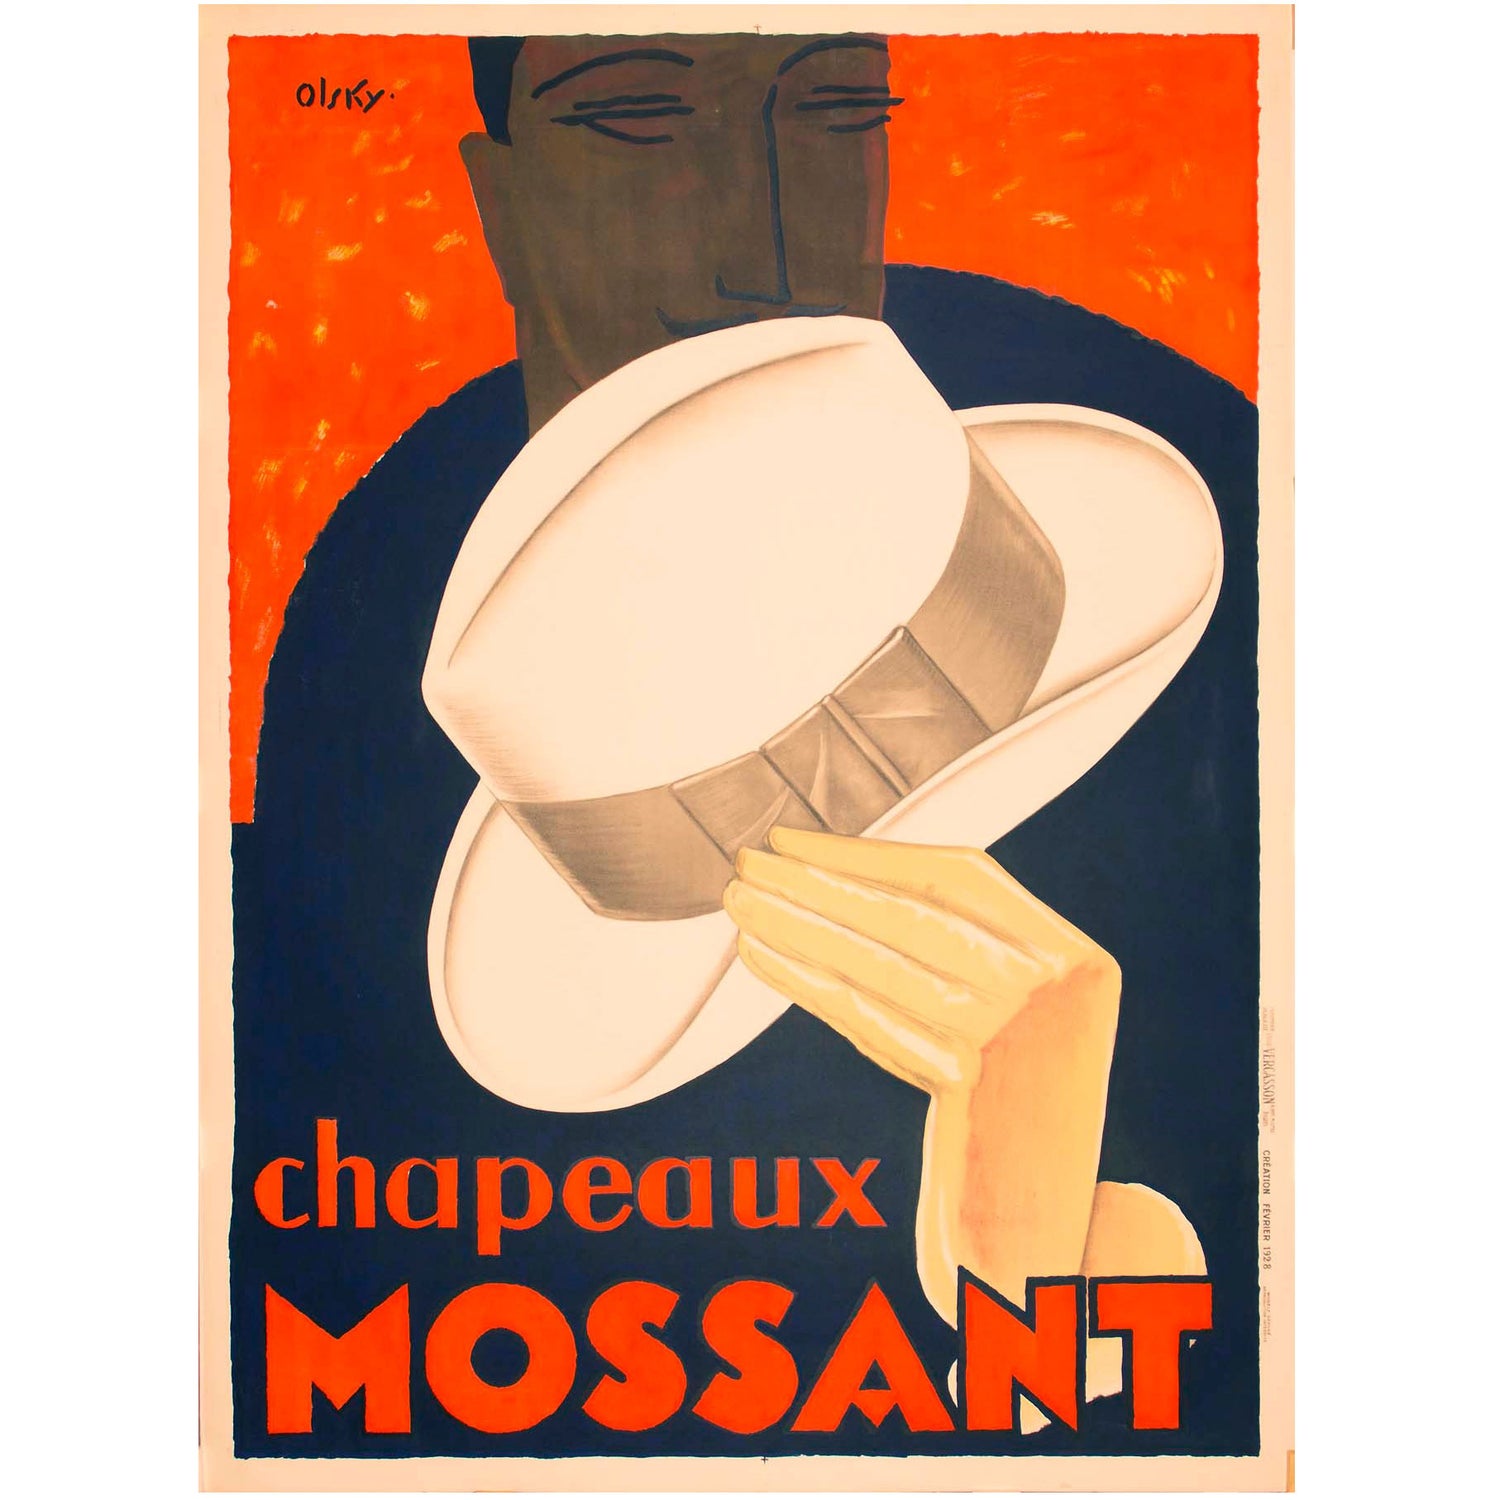 Original French Art Deco Chapeaux Mossant Poster by Olsky at 1stDibs